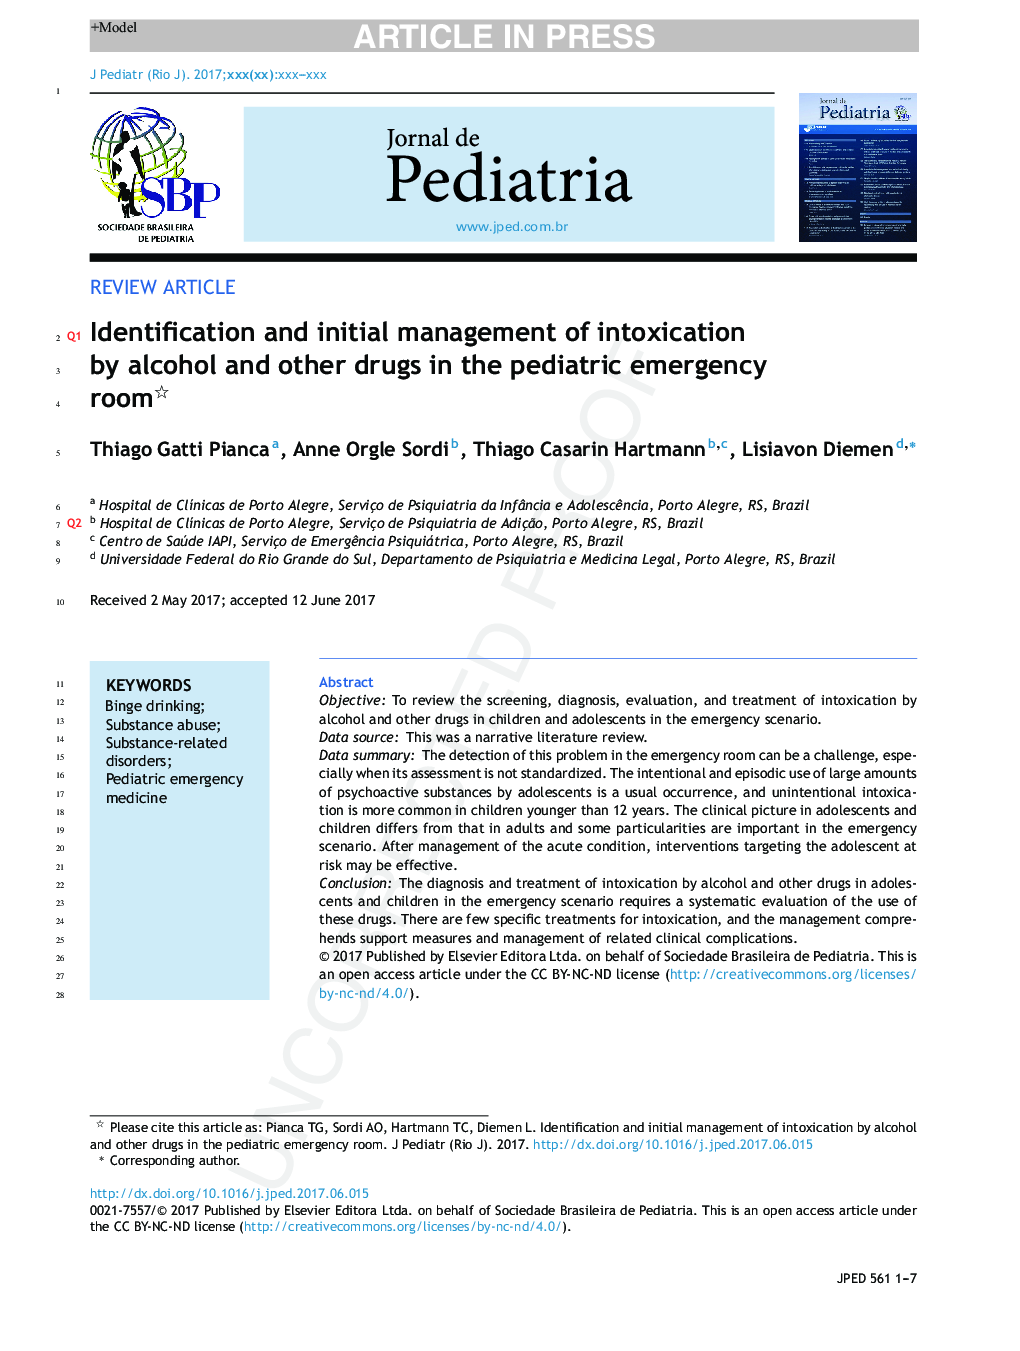 Identification and initial management of intoxication by alcohol and other drugs in the pediatric emergency room